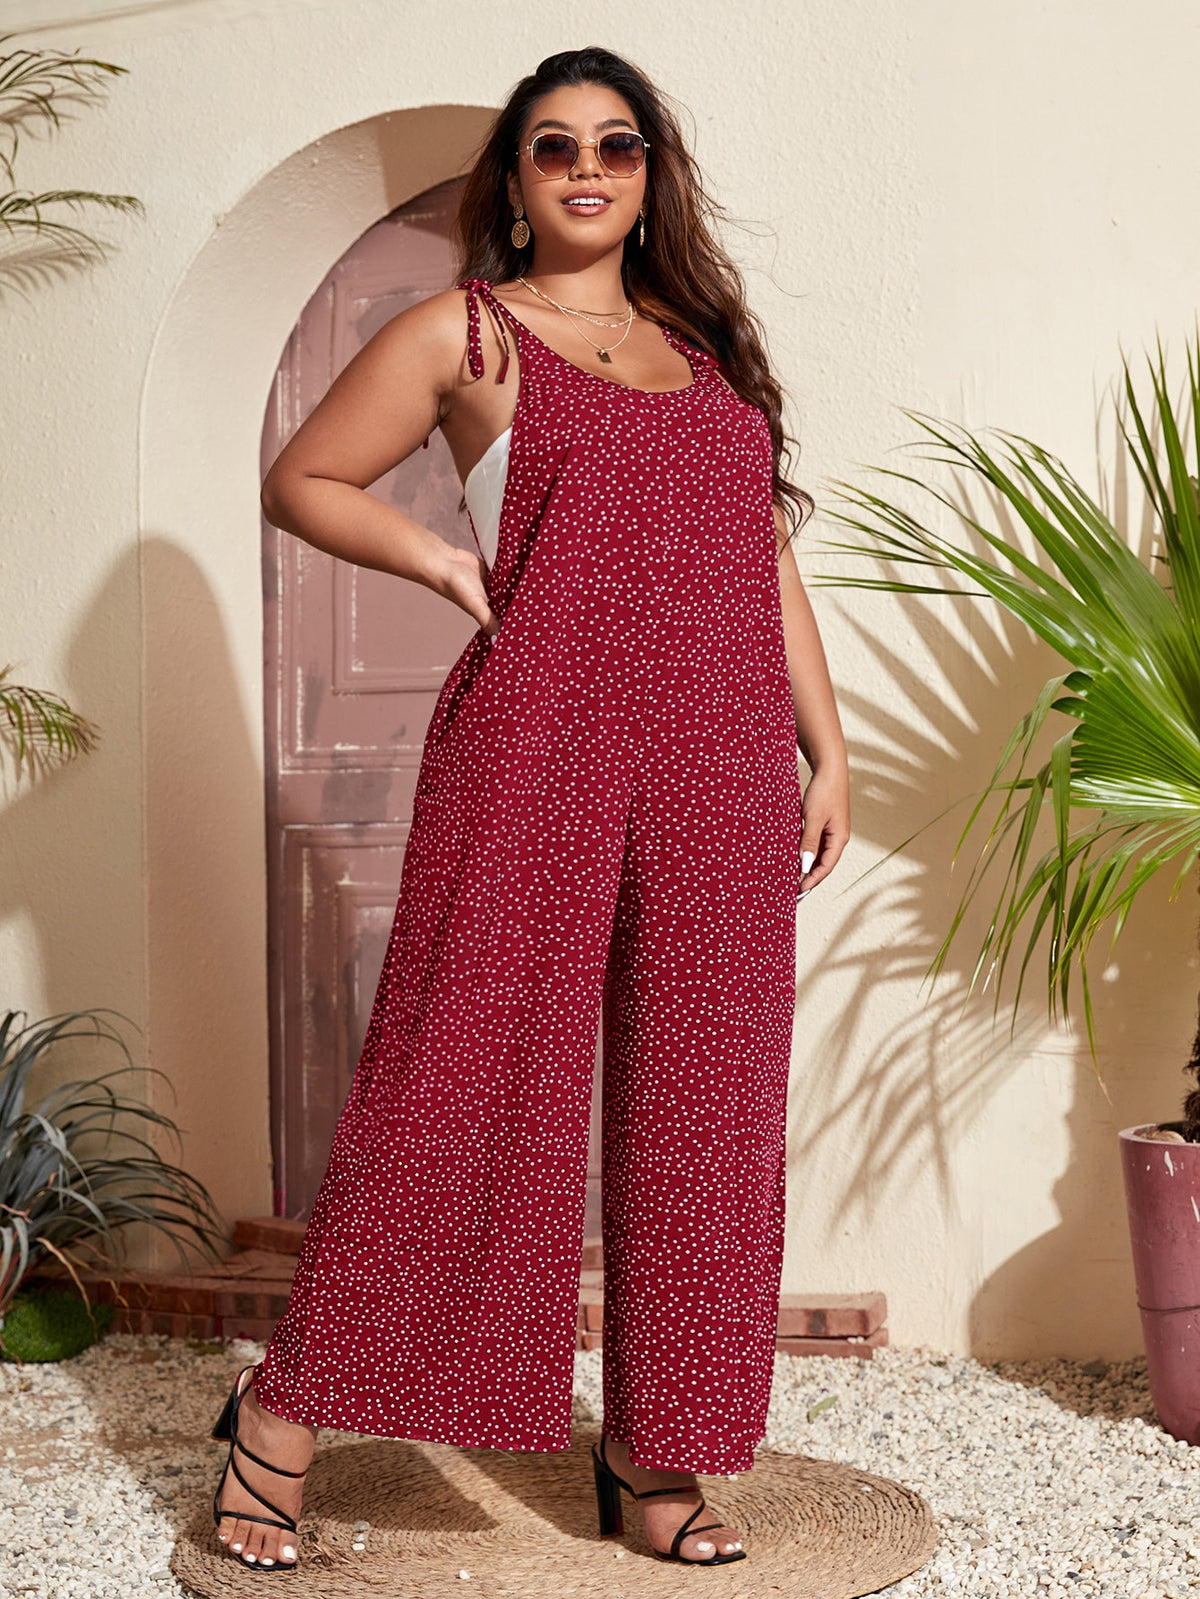 Plus Polka Dot Cami Jumpsuit with Knotted Shoulder - Burgundy / 4XL